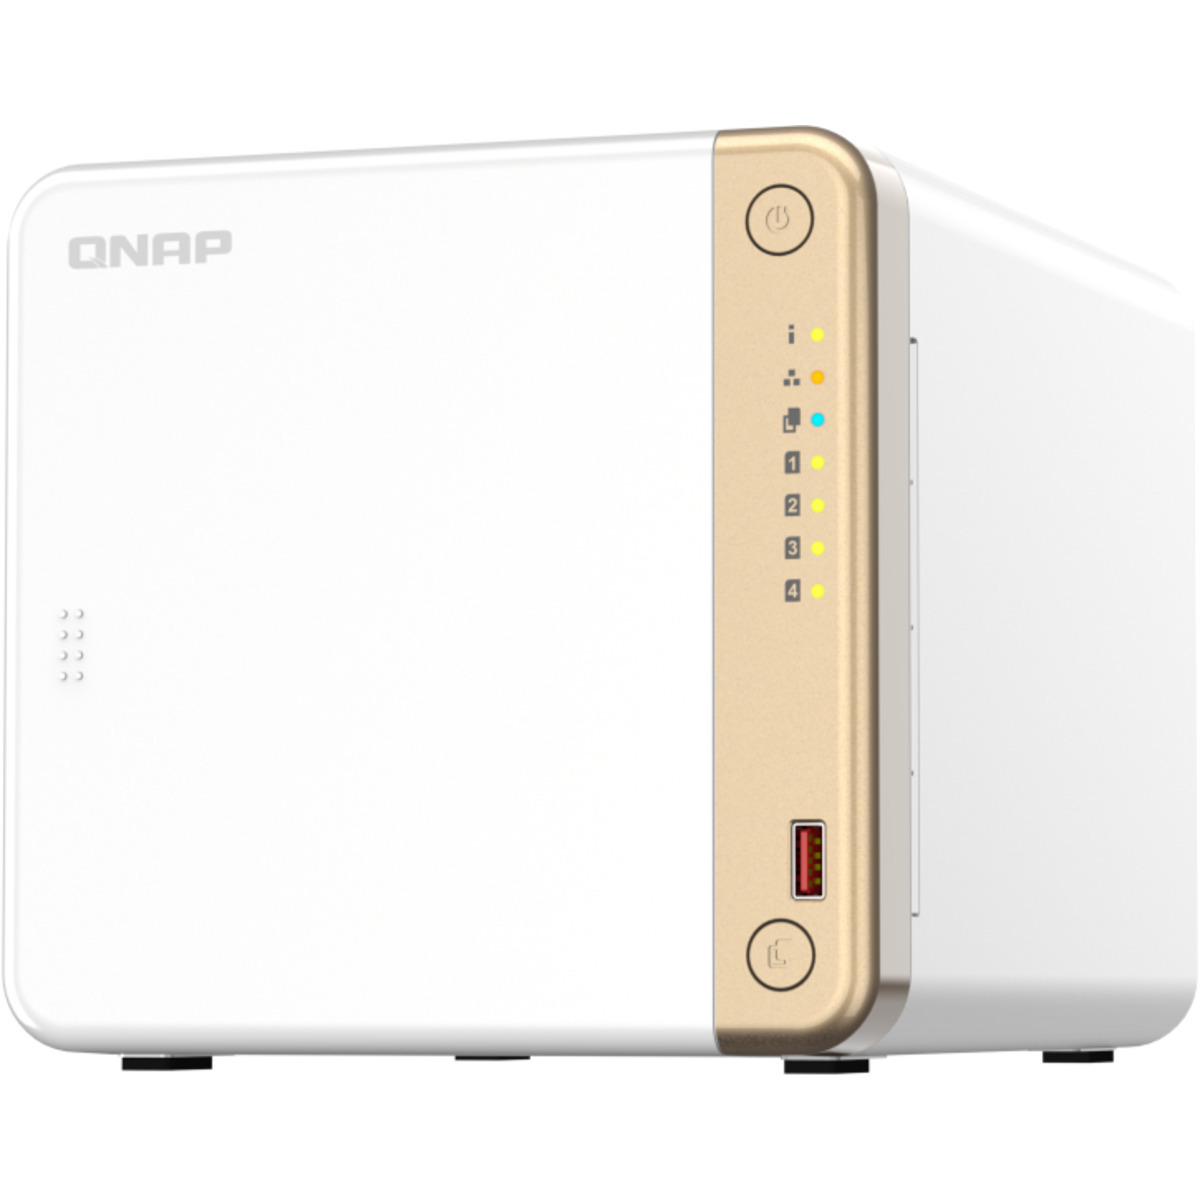 QNAP TS-462 96tb 4-Bay Desktop Multimedia / Power User / Business NAS - Network Attached Storage Device 4x24tb Seagate IronWolf Pro ST24000NT002 3.5 7200rpm SATA 6Gb/s HDD NAS Class Drives Installed - Burn-In Tested - ON SALE TS-462